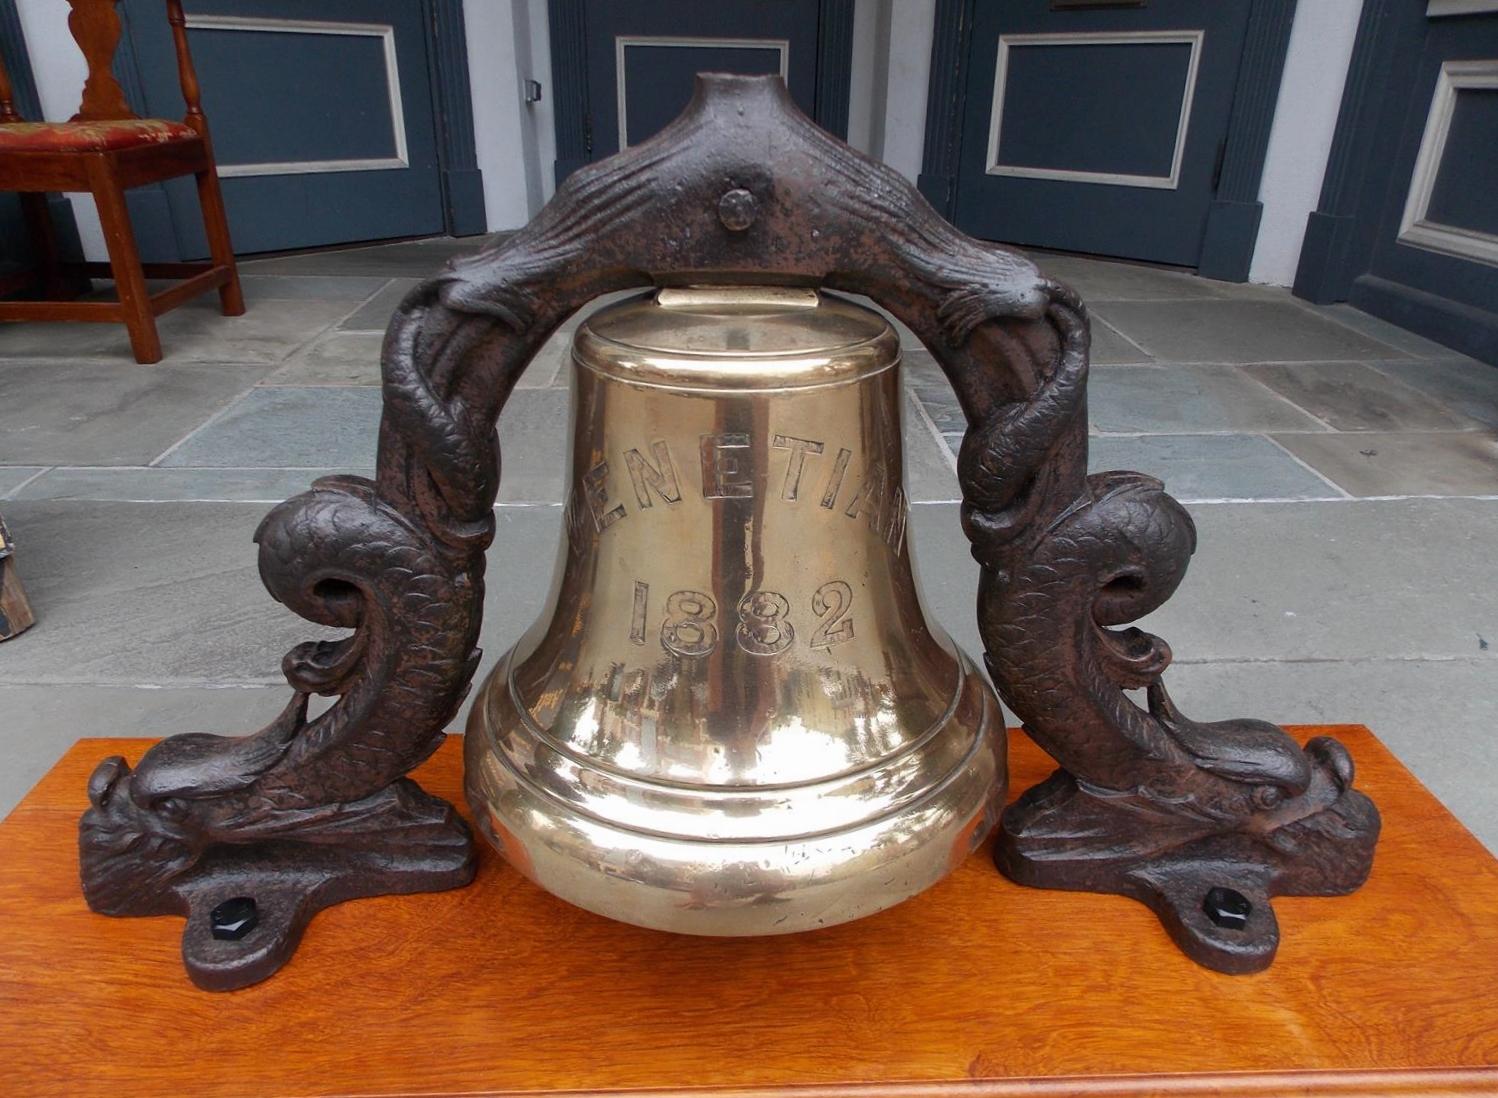 Late 19th Century English Solid Brass Ship's Bell Mounted on Dolphin Yoke, “S.S. Venetian” C. 1882